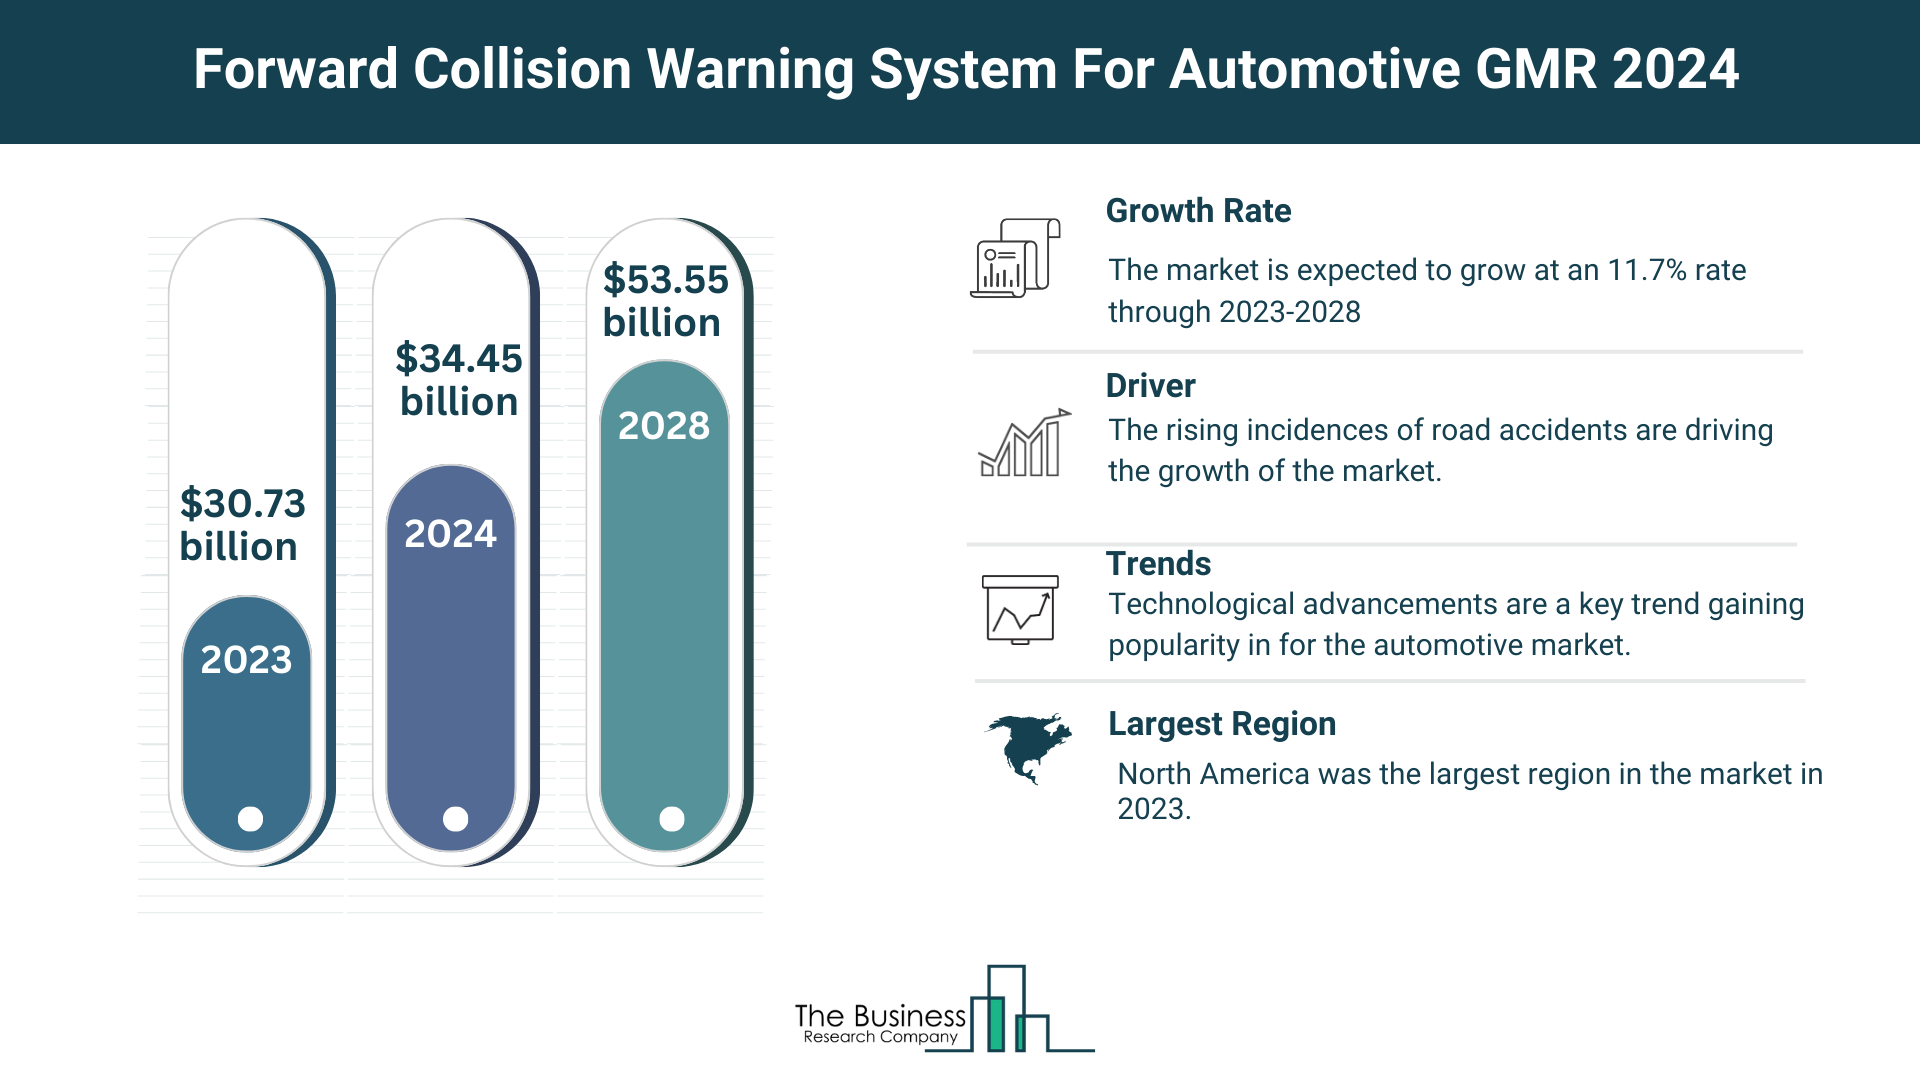 5 Key Takeaways From The Forward Collision Warning System For Automotive Market Report 2024